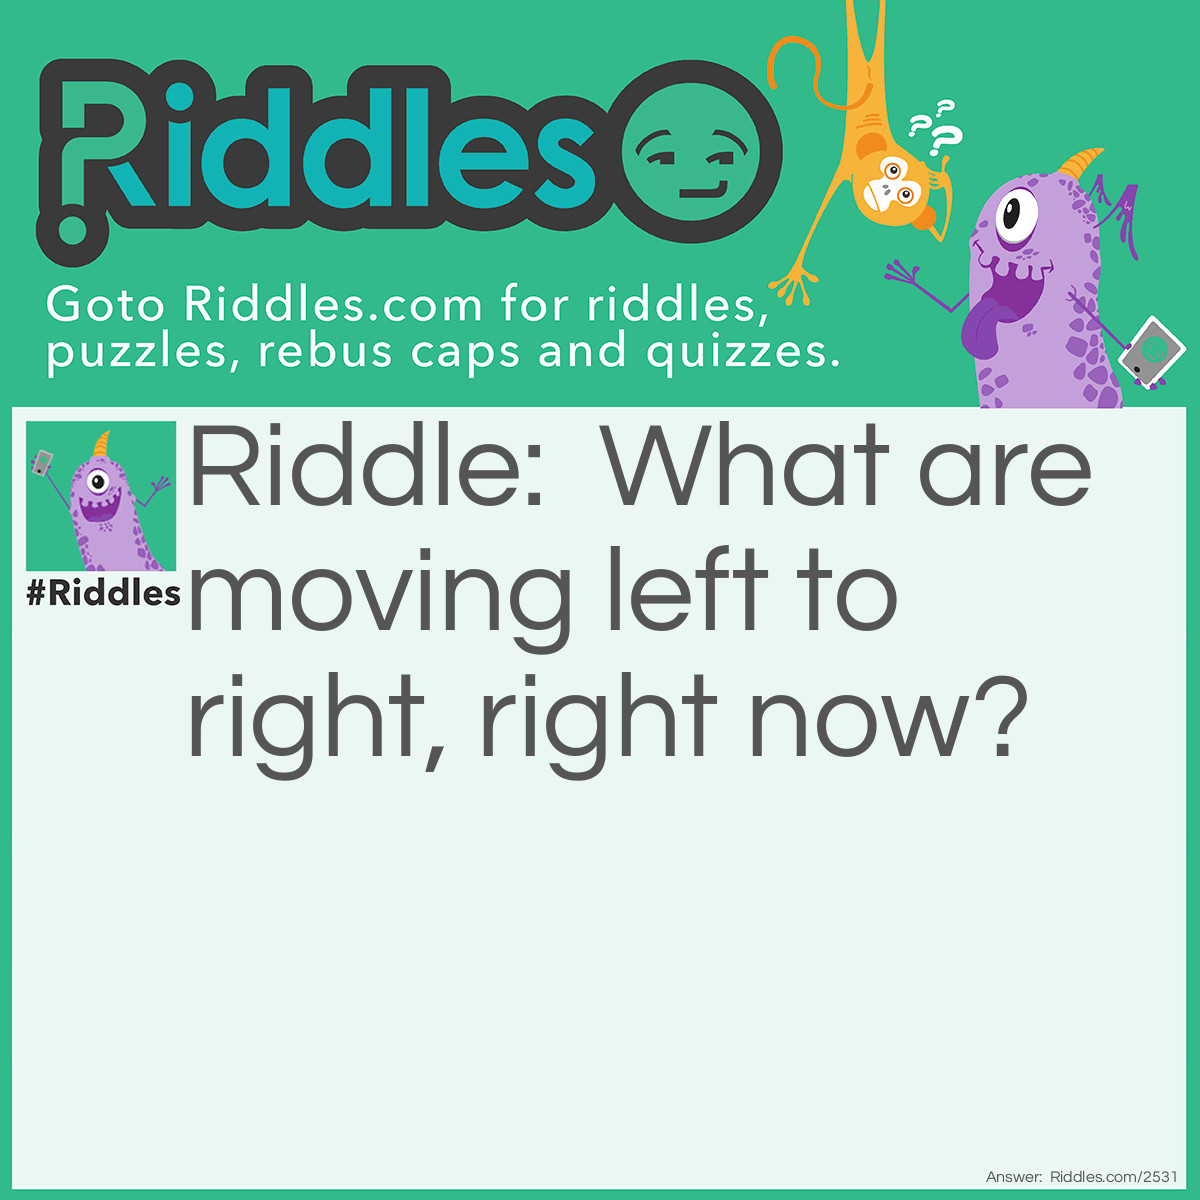 Riddle: What are moving left to right, right now? Answer: Your eyes!